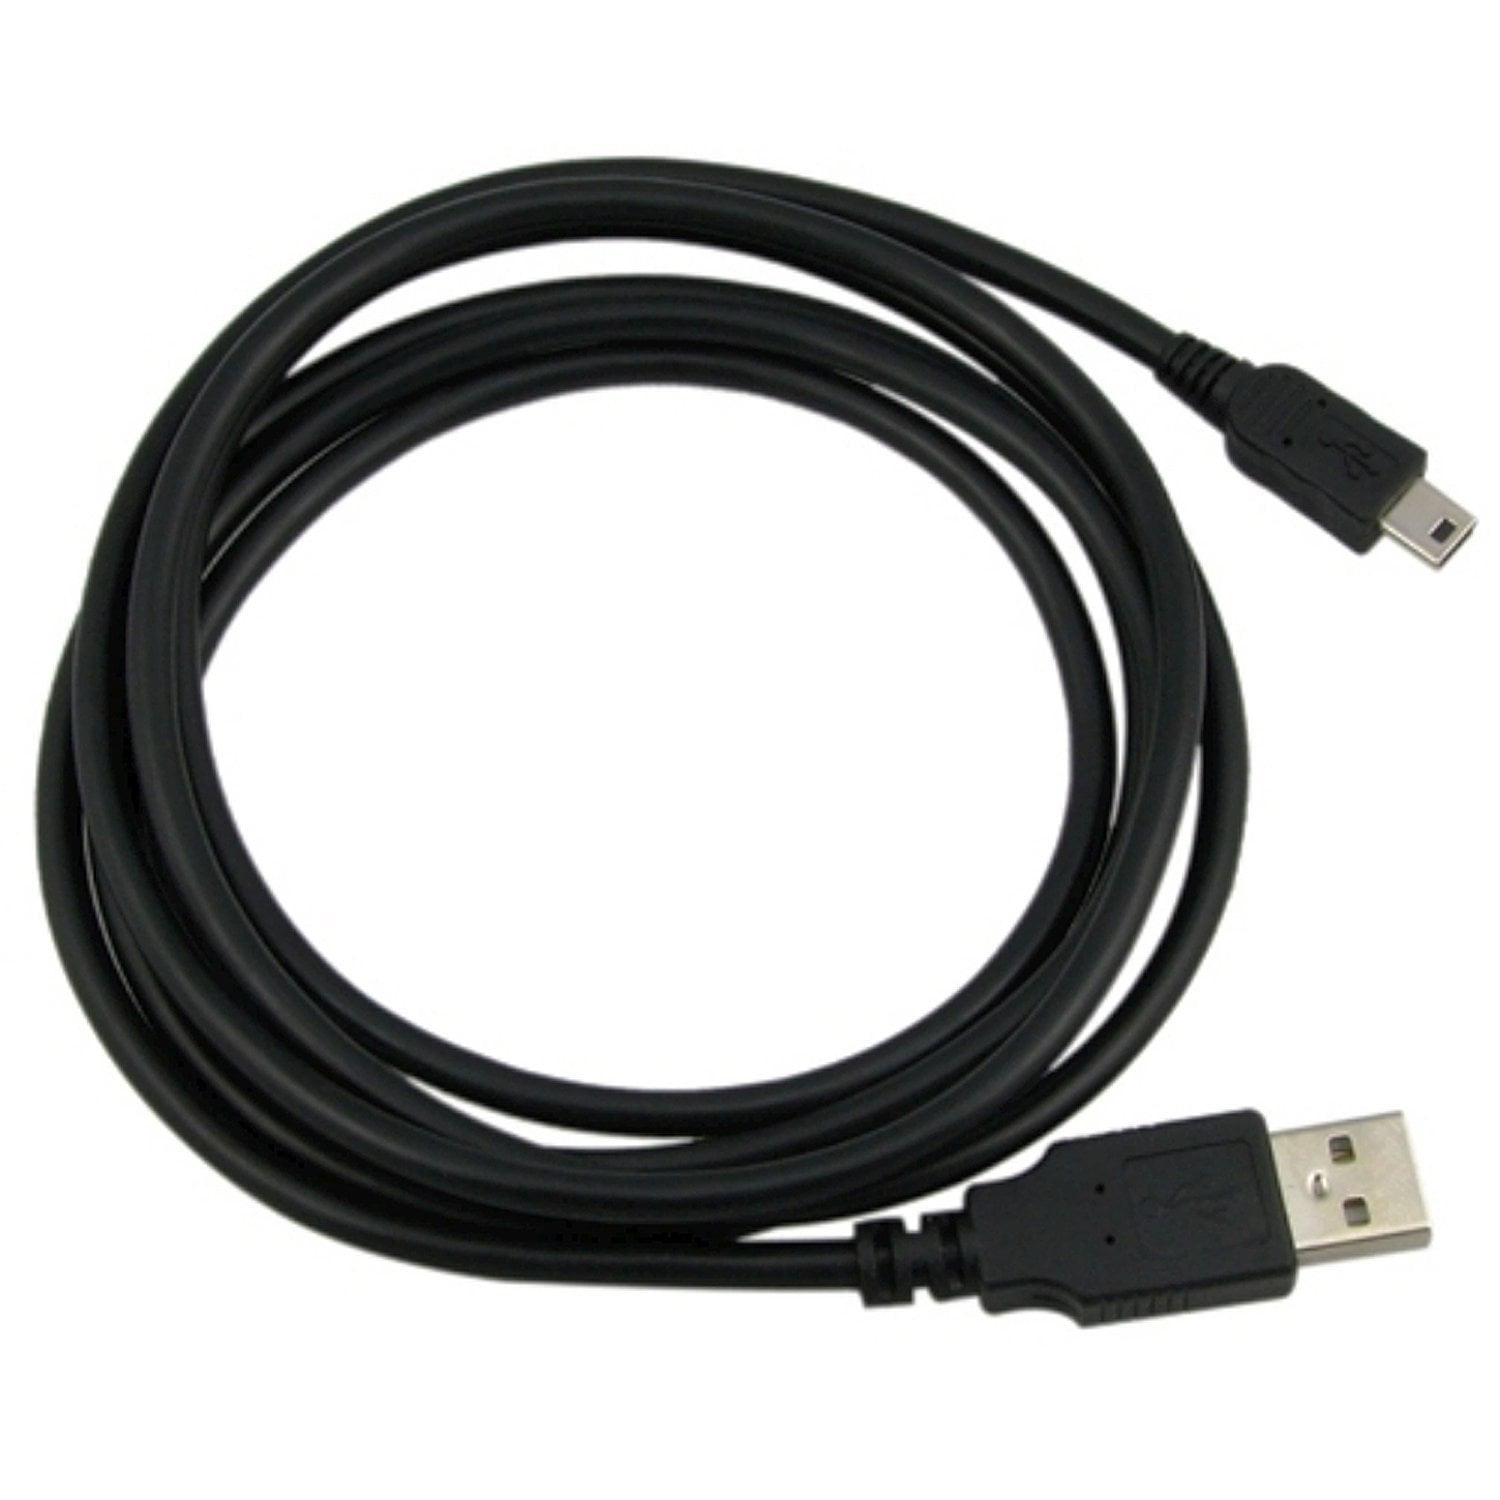 OLYMPUS  FE-210,FE-270 CAMERA USB DATA SYNC CABLE LEAD FOR PC AND MAC 